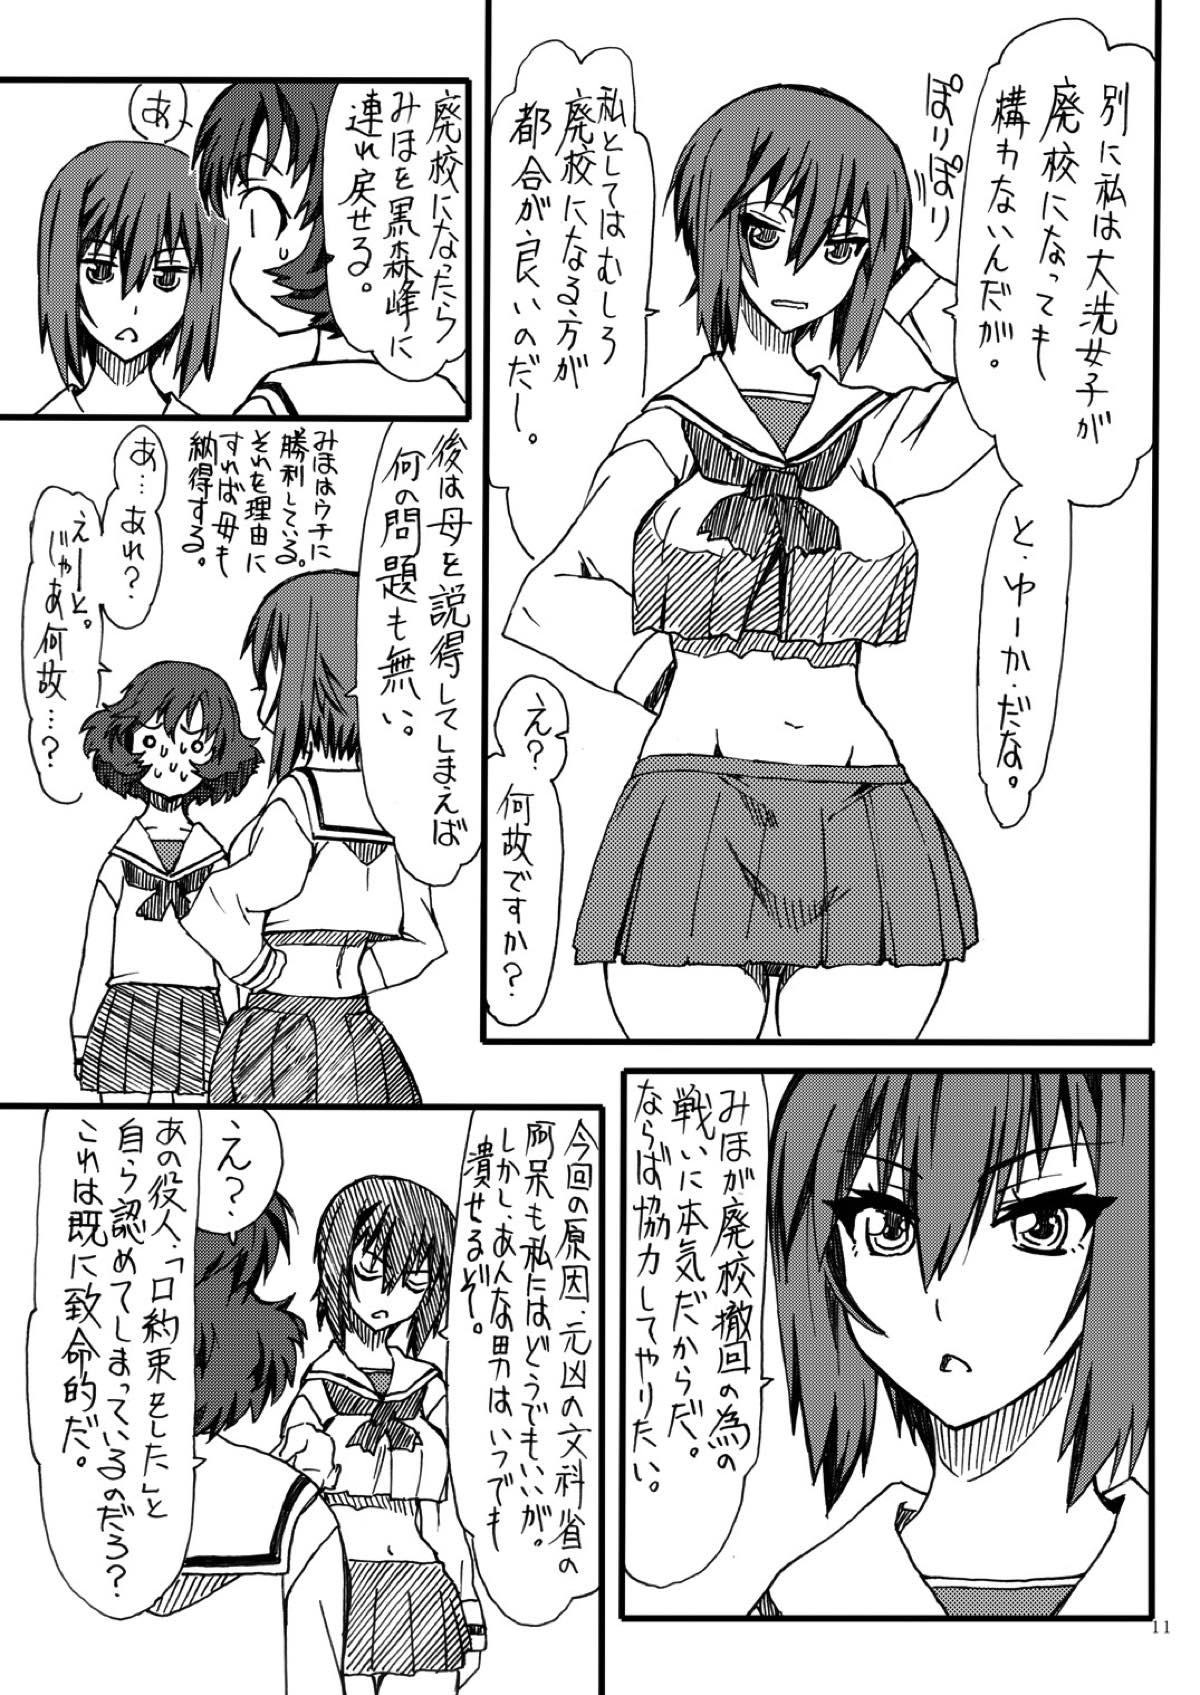 Teen Sex MahoPan 2 - Girls und panzer Pure18 - Page 10